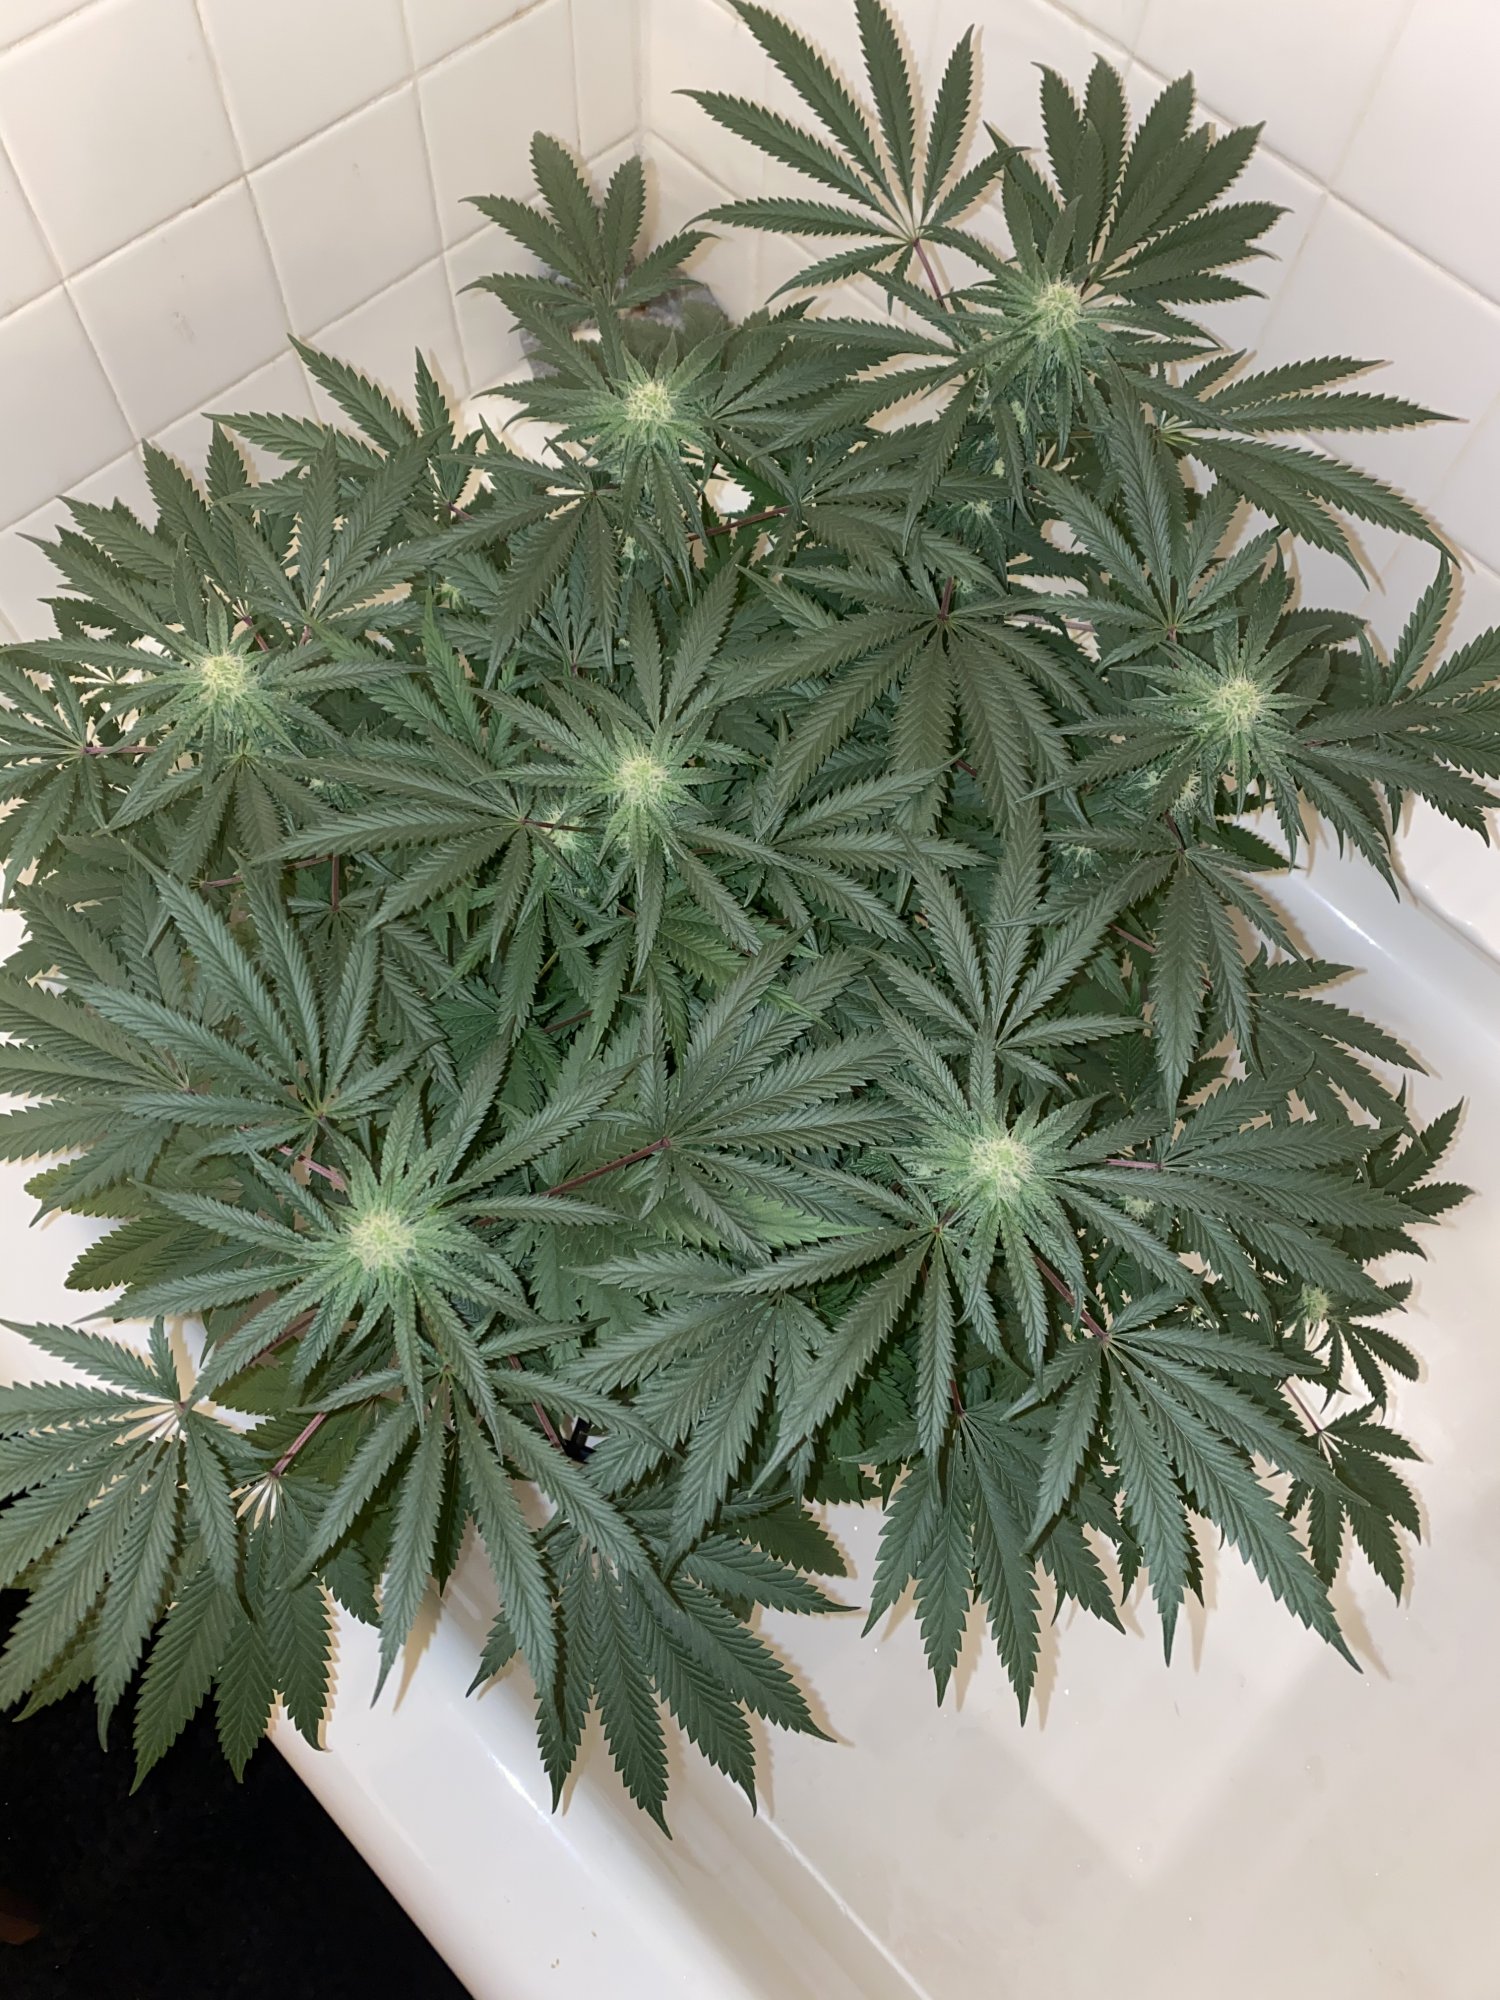 Day 31 of flower lower leaves drooping ok 3